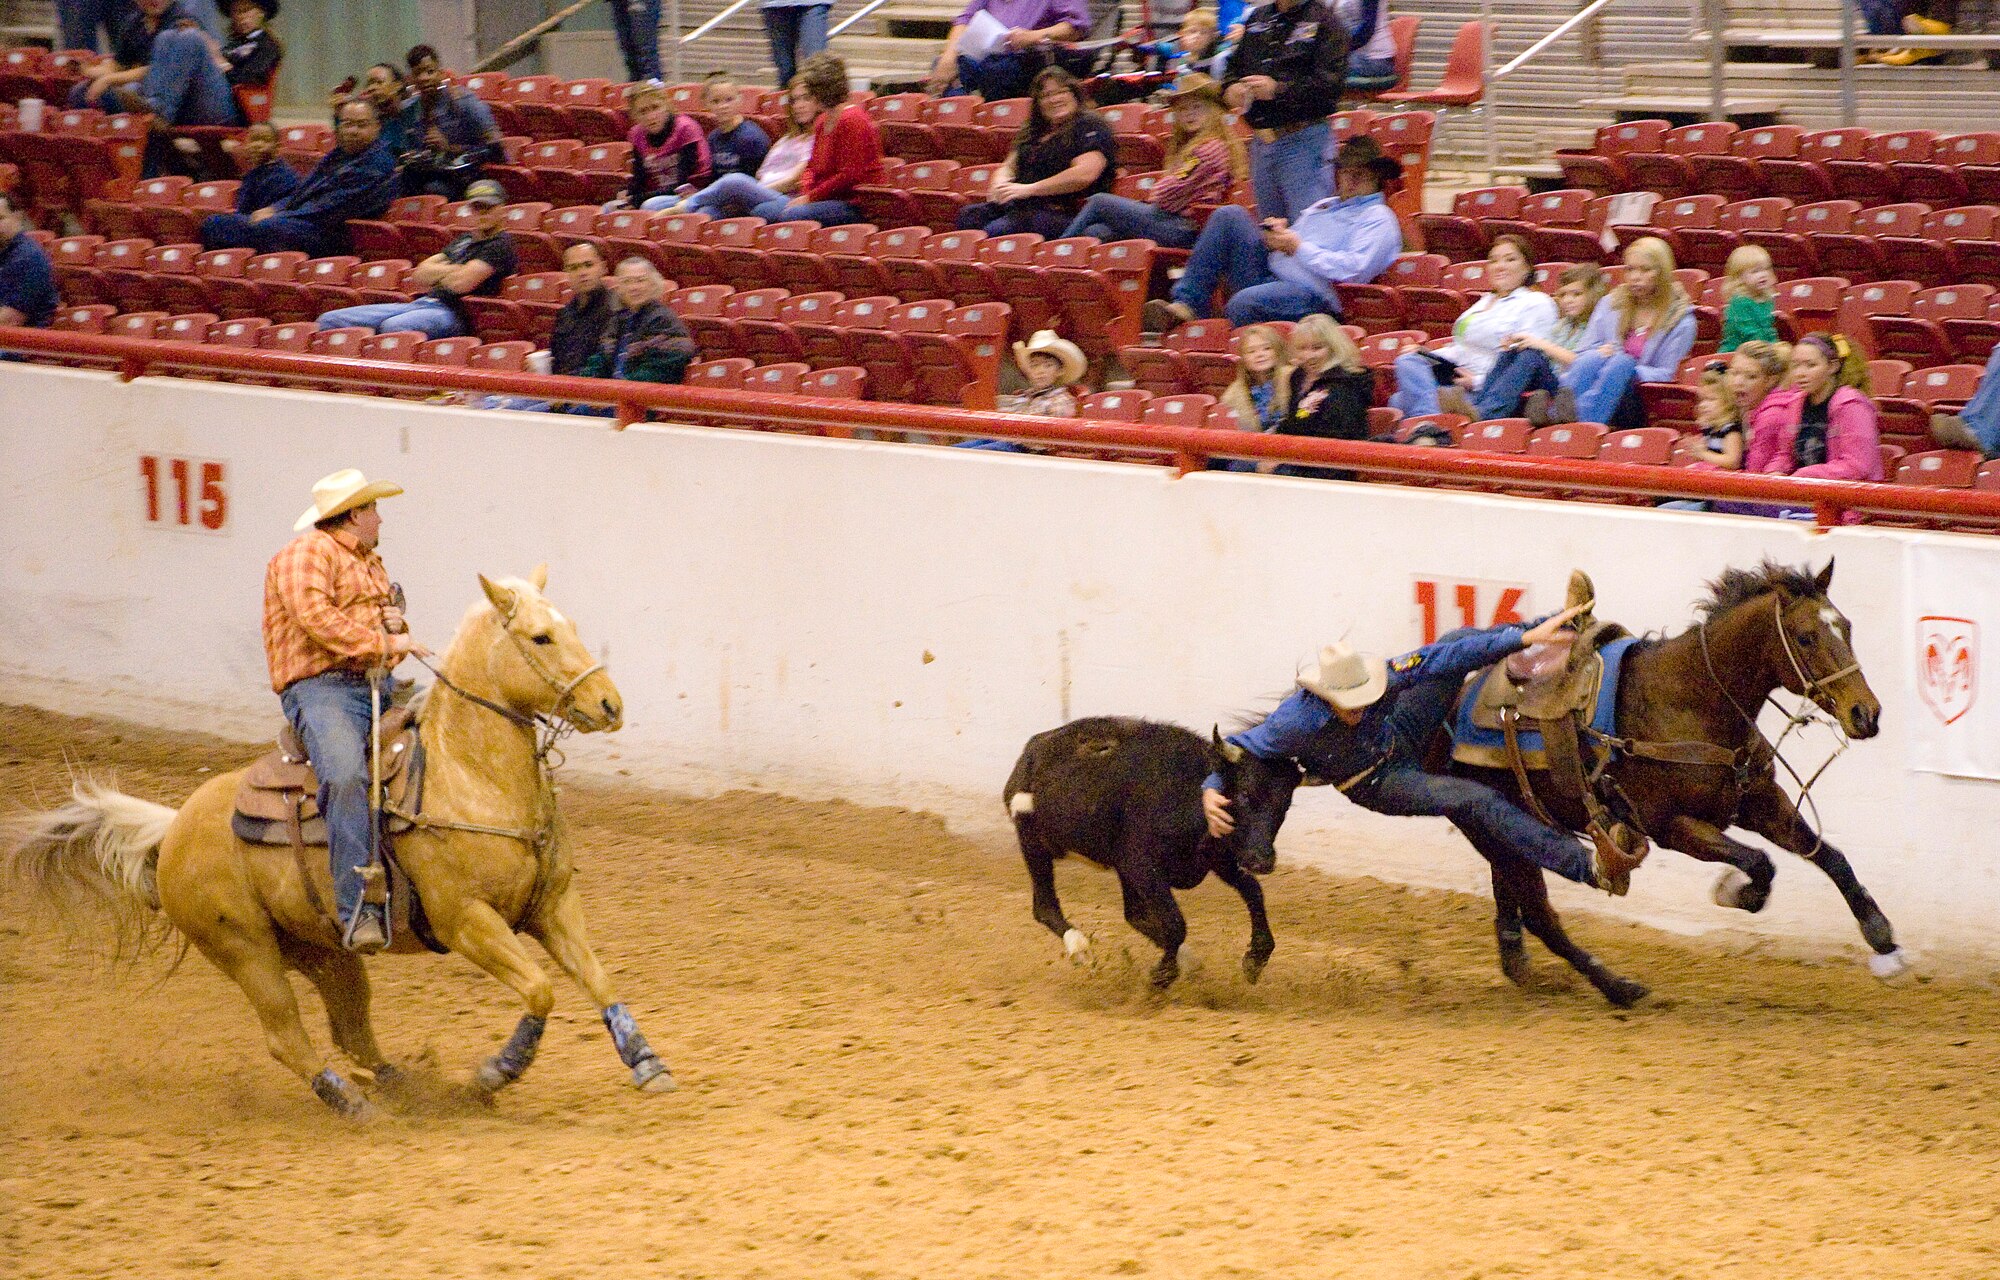 Master Sgt. Travis Beck reaches for his steer during the steer wrestling competition at the Professional Armed Forces Rodeo Associations World Finals Nov. 20, 2010, in Glen Rose, Texas. Sergeant Beck is assigned to Travis Air Force Base, Calif. and earned first place in the Men's All-Around taking top honors of the rodeo. (U.S. Air Force photo/Master Sgt. Jack Braden)